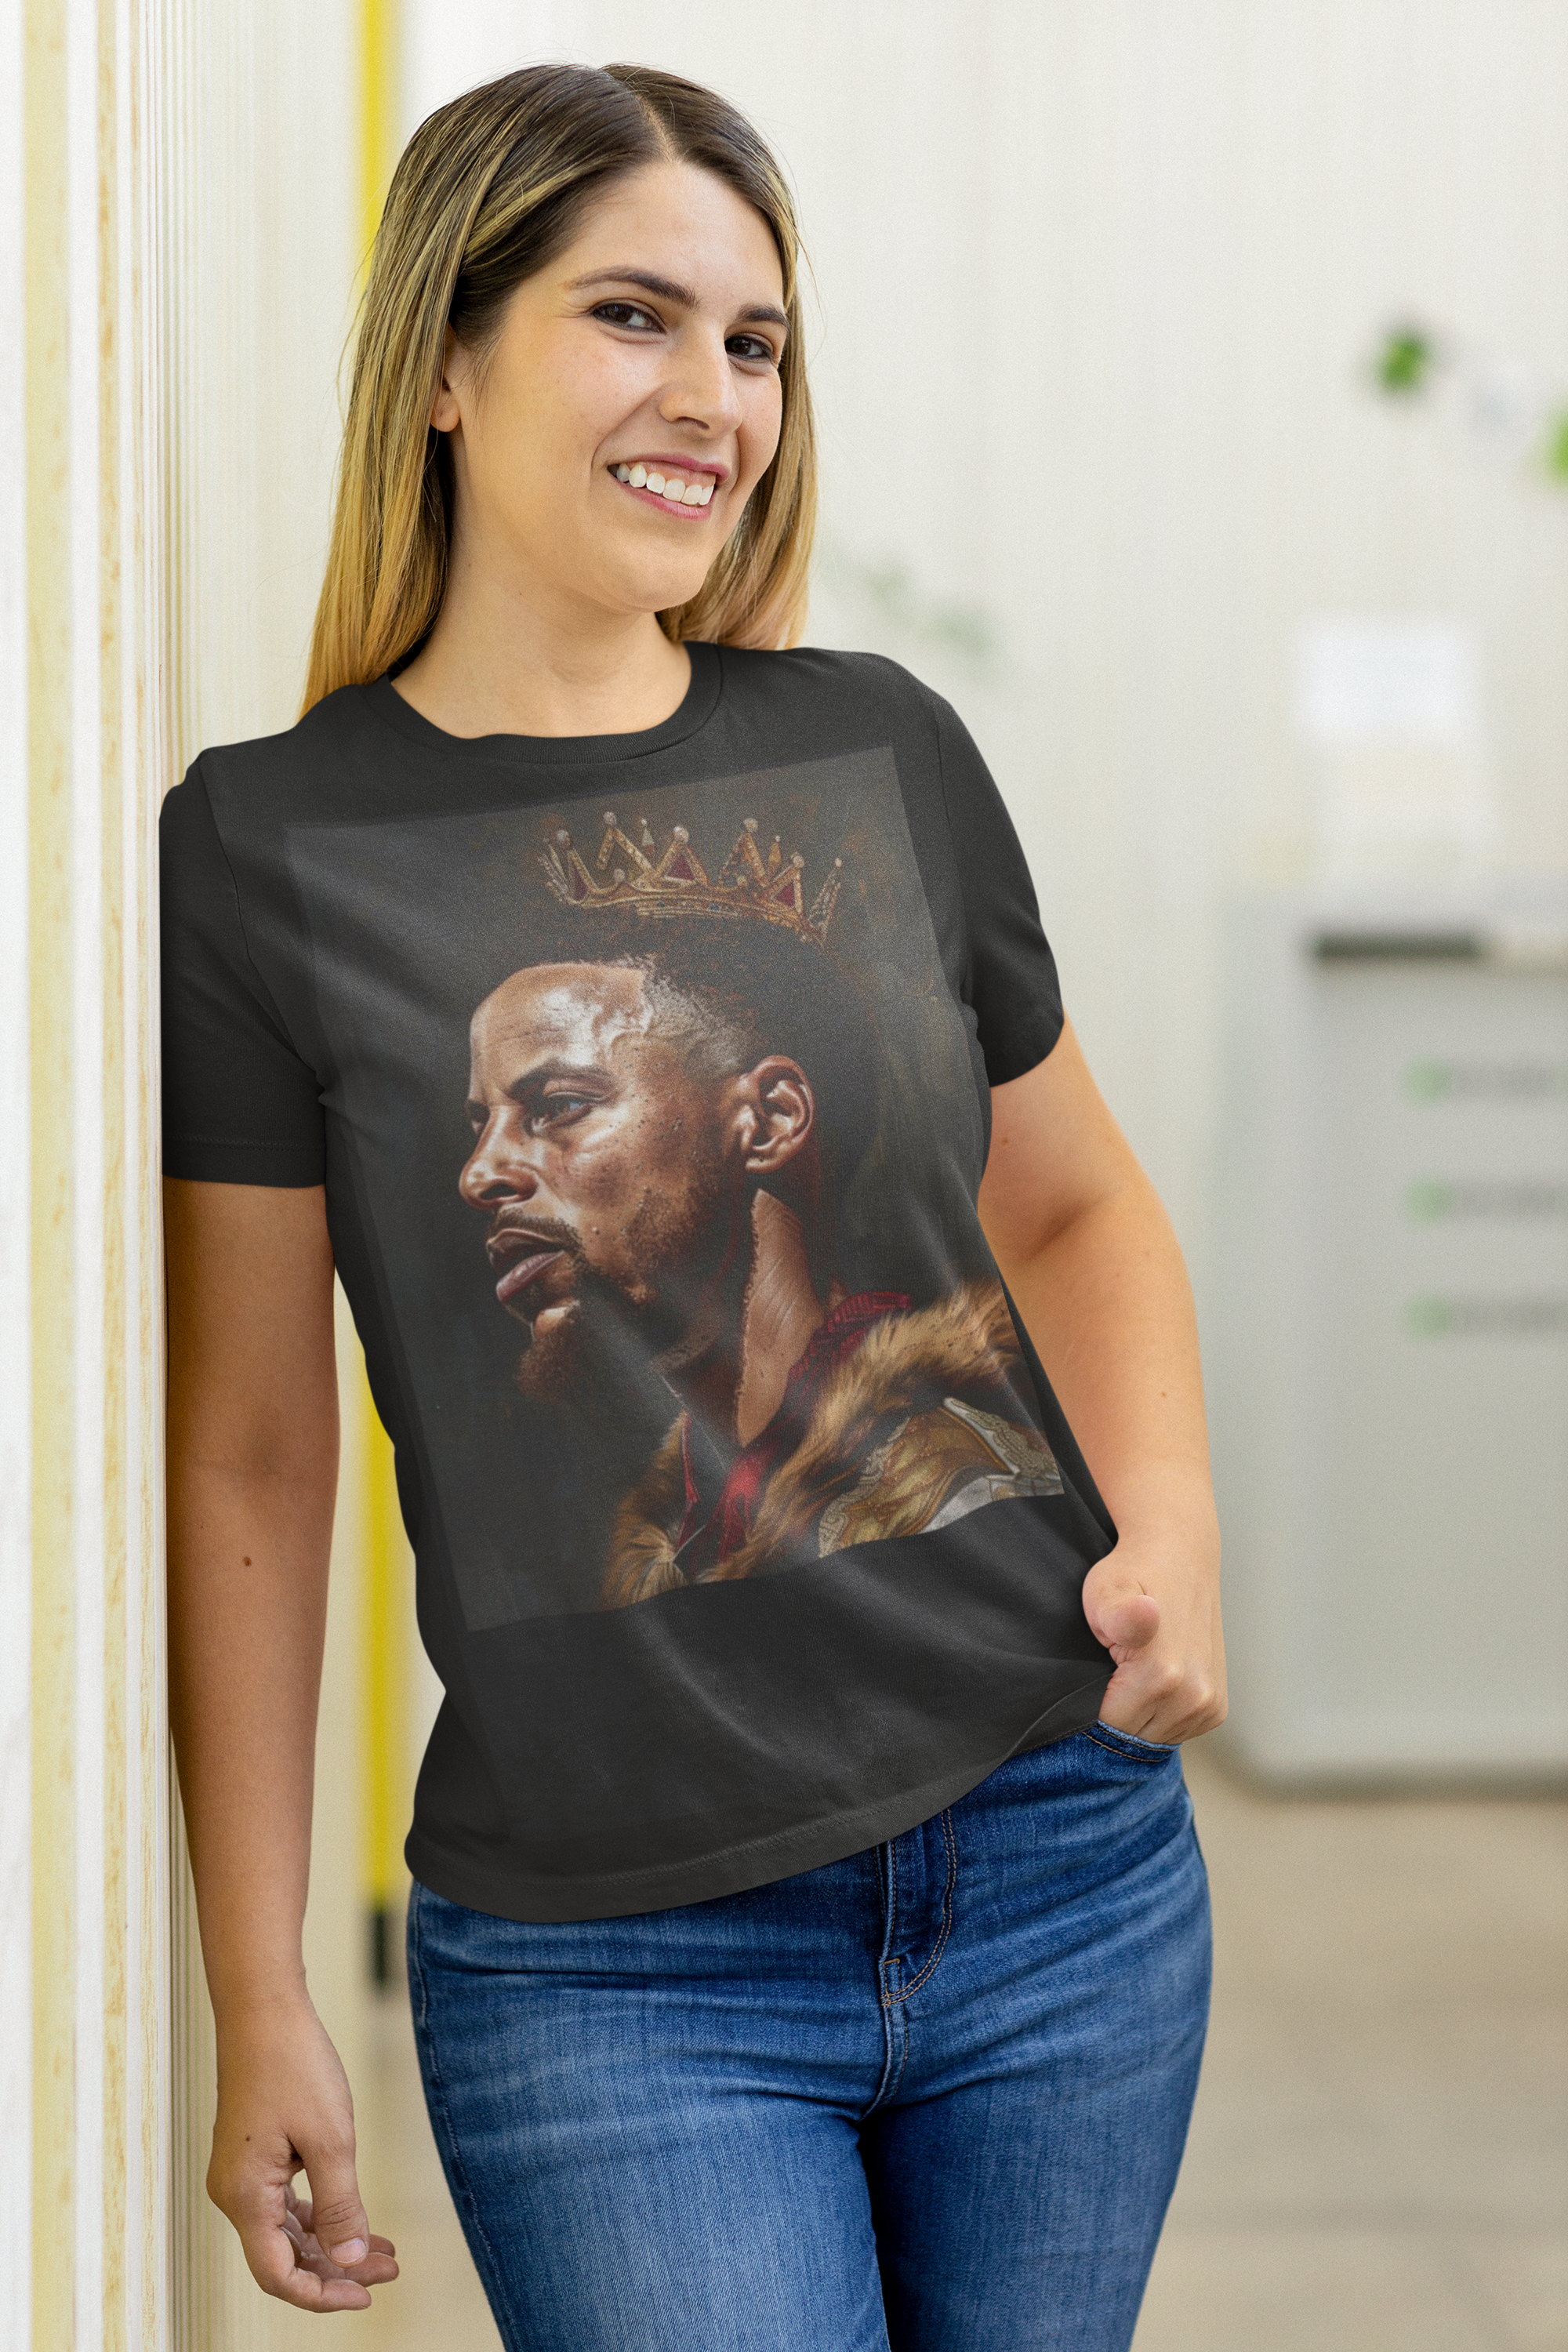 The image highlights the sophisticated and unique design of the unisex garment-dyed t-shirt, showcasing the detailed Renaissance-style painting of King Steph in action. The rich, garment-dyed colors set the perfect backdrop for the artwork, emphasizing the fusion of historical artistry and modern basketball culture.